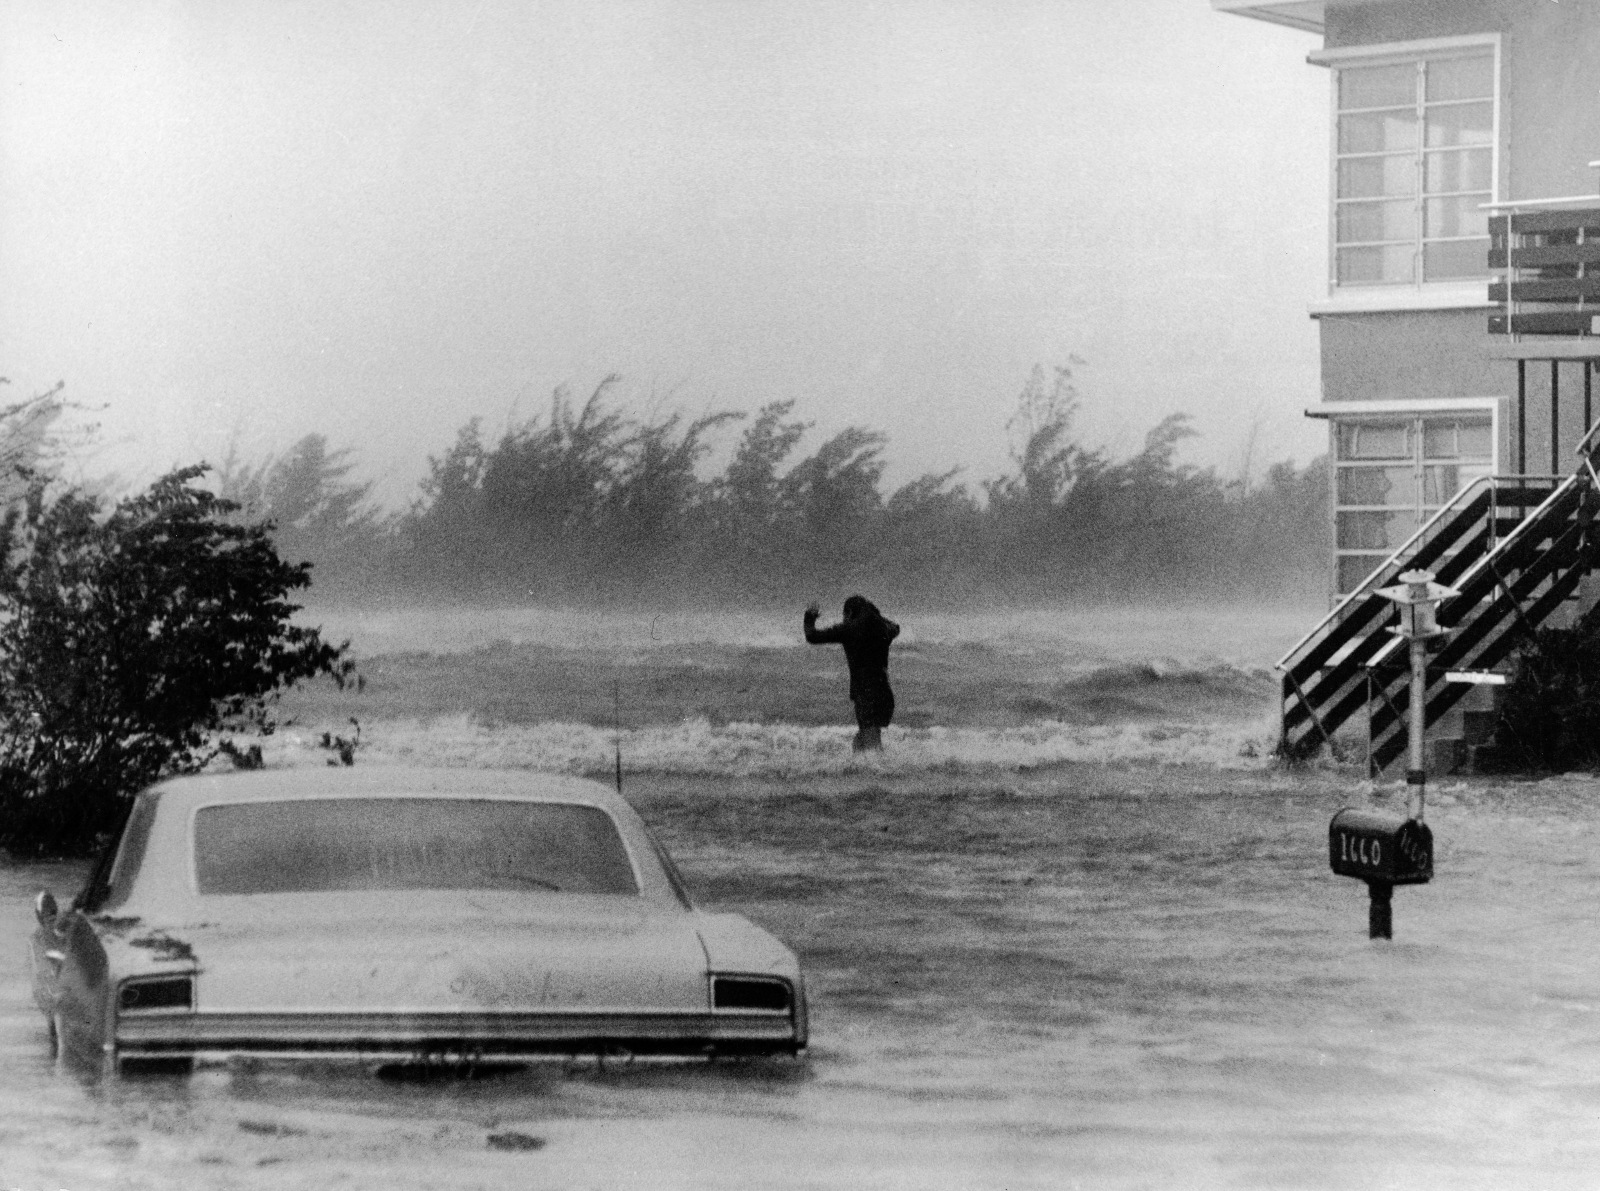 Old, black and white photo of a resident wading through floodwaters in windy conditions